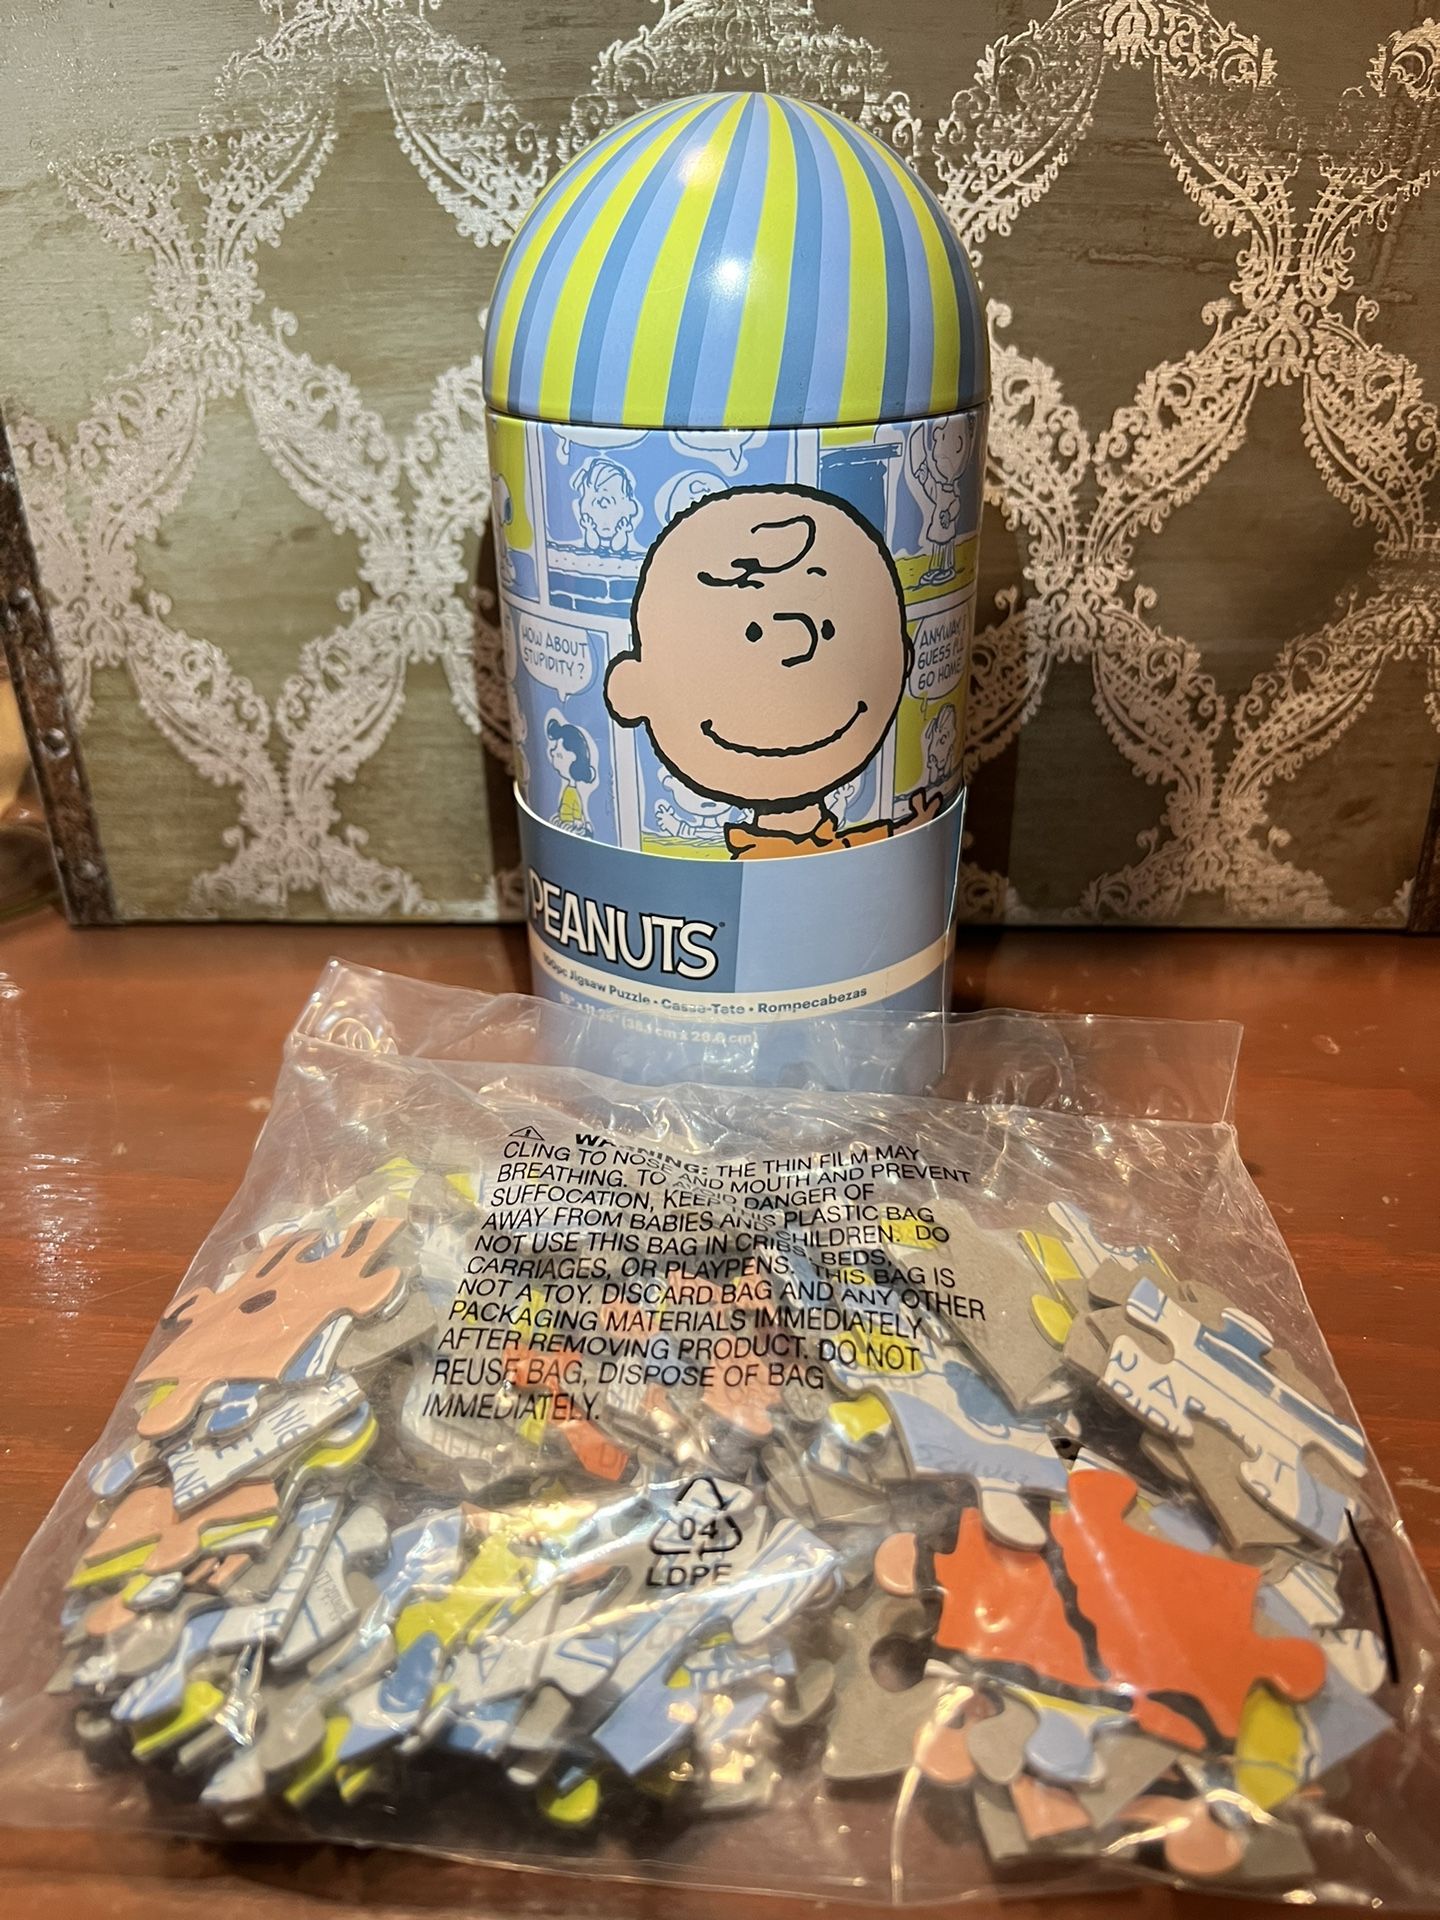 Peanuts 100 Piece Jigsaw Charlie Brown Puzzle, NWT